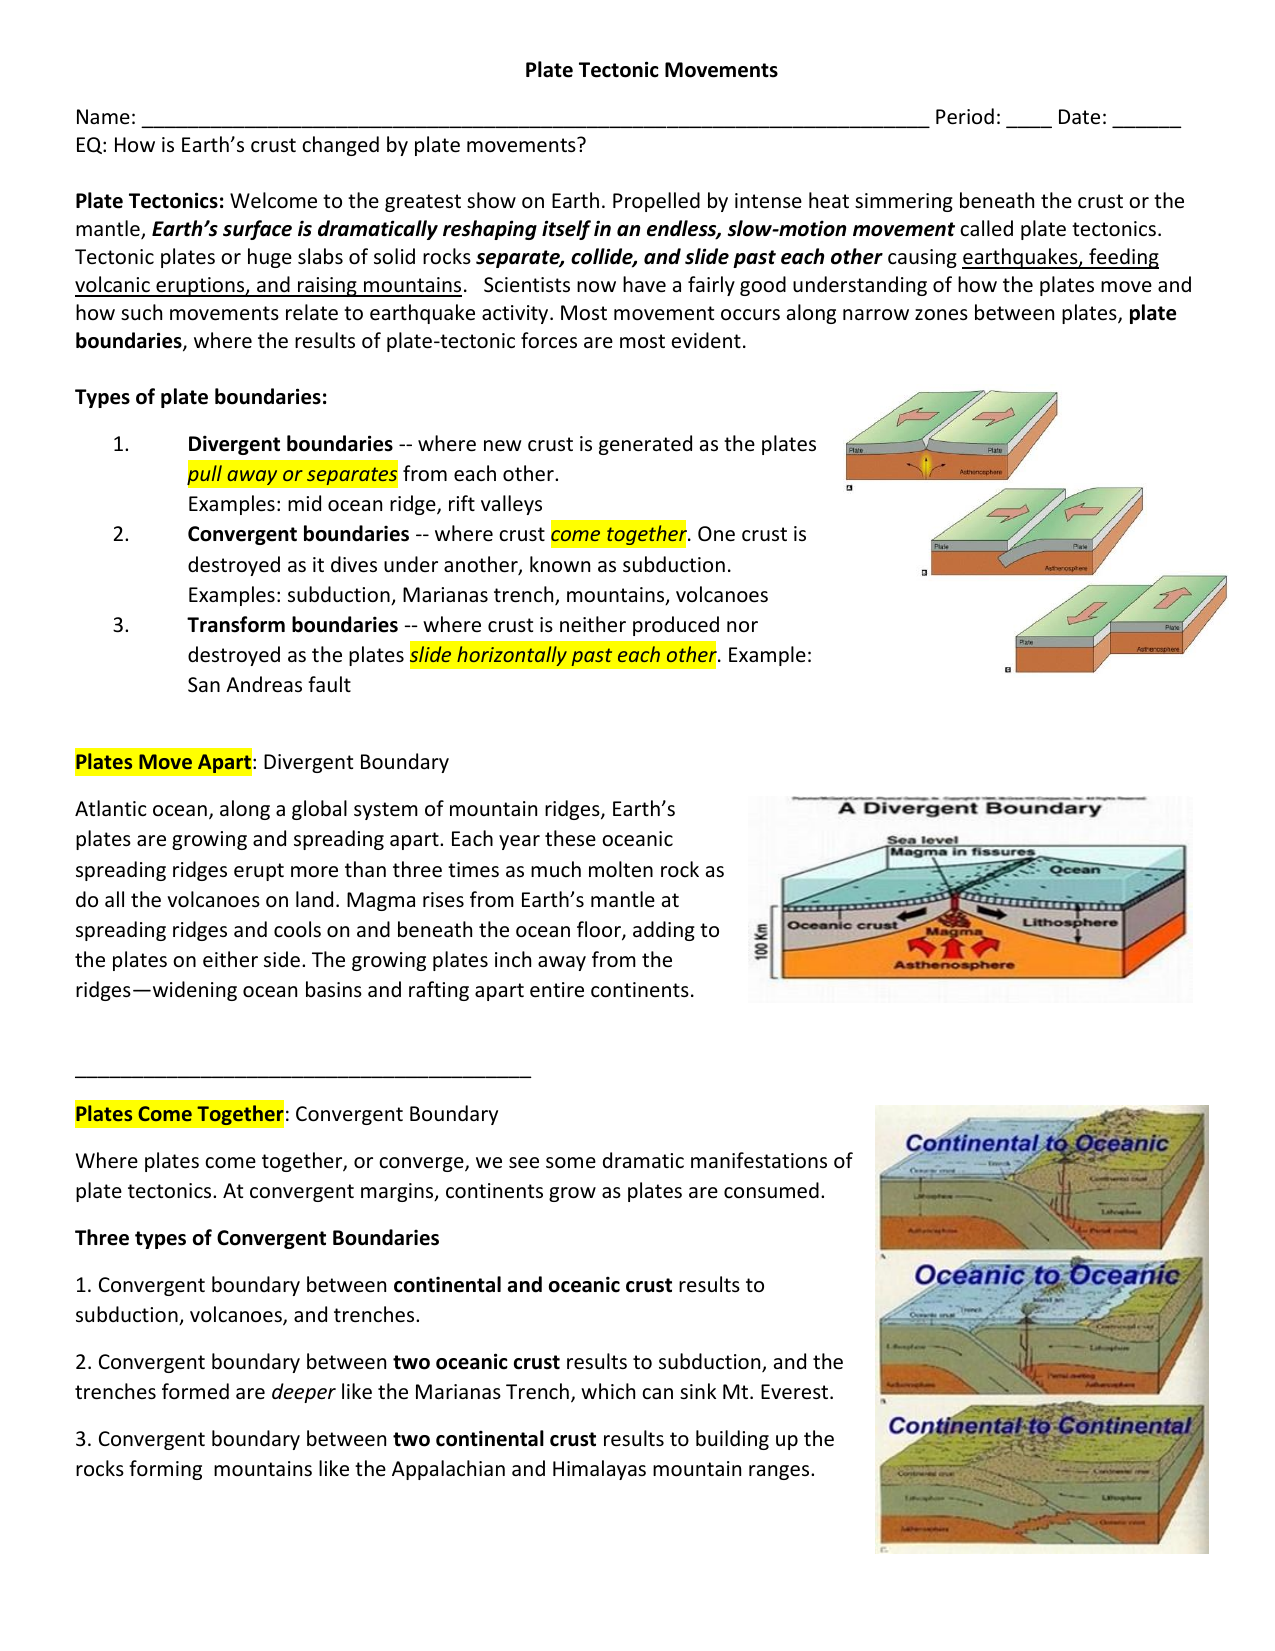 essay type questions on plate tectonics